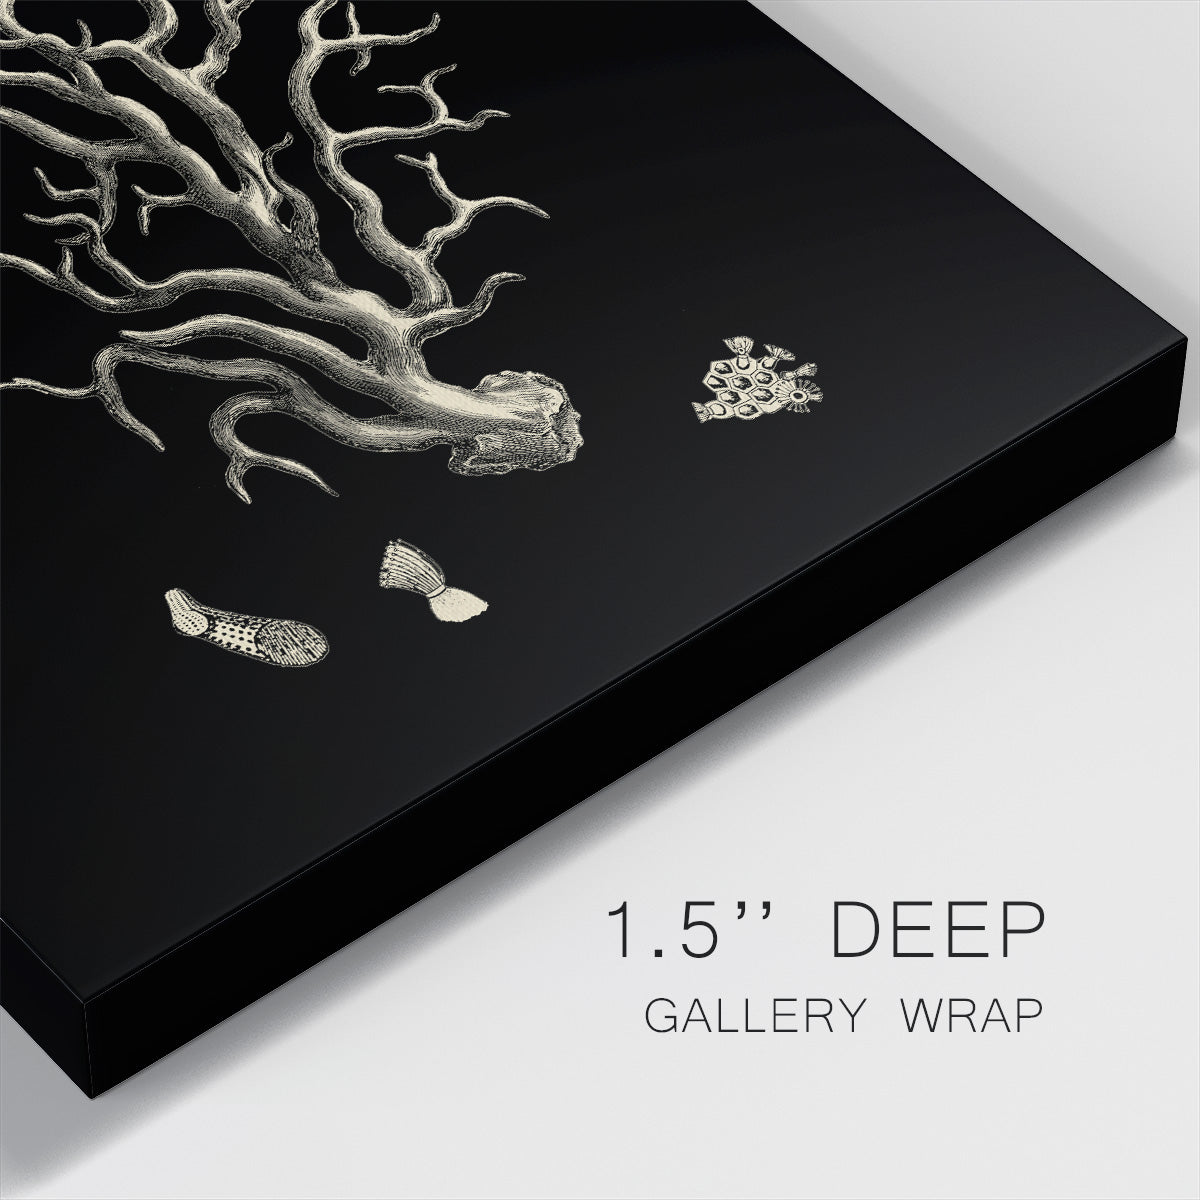 Black and Tan Coral I-Premium Gallery Wrapped Canvas - Ready to Hang